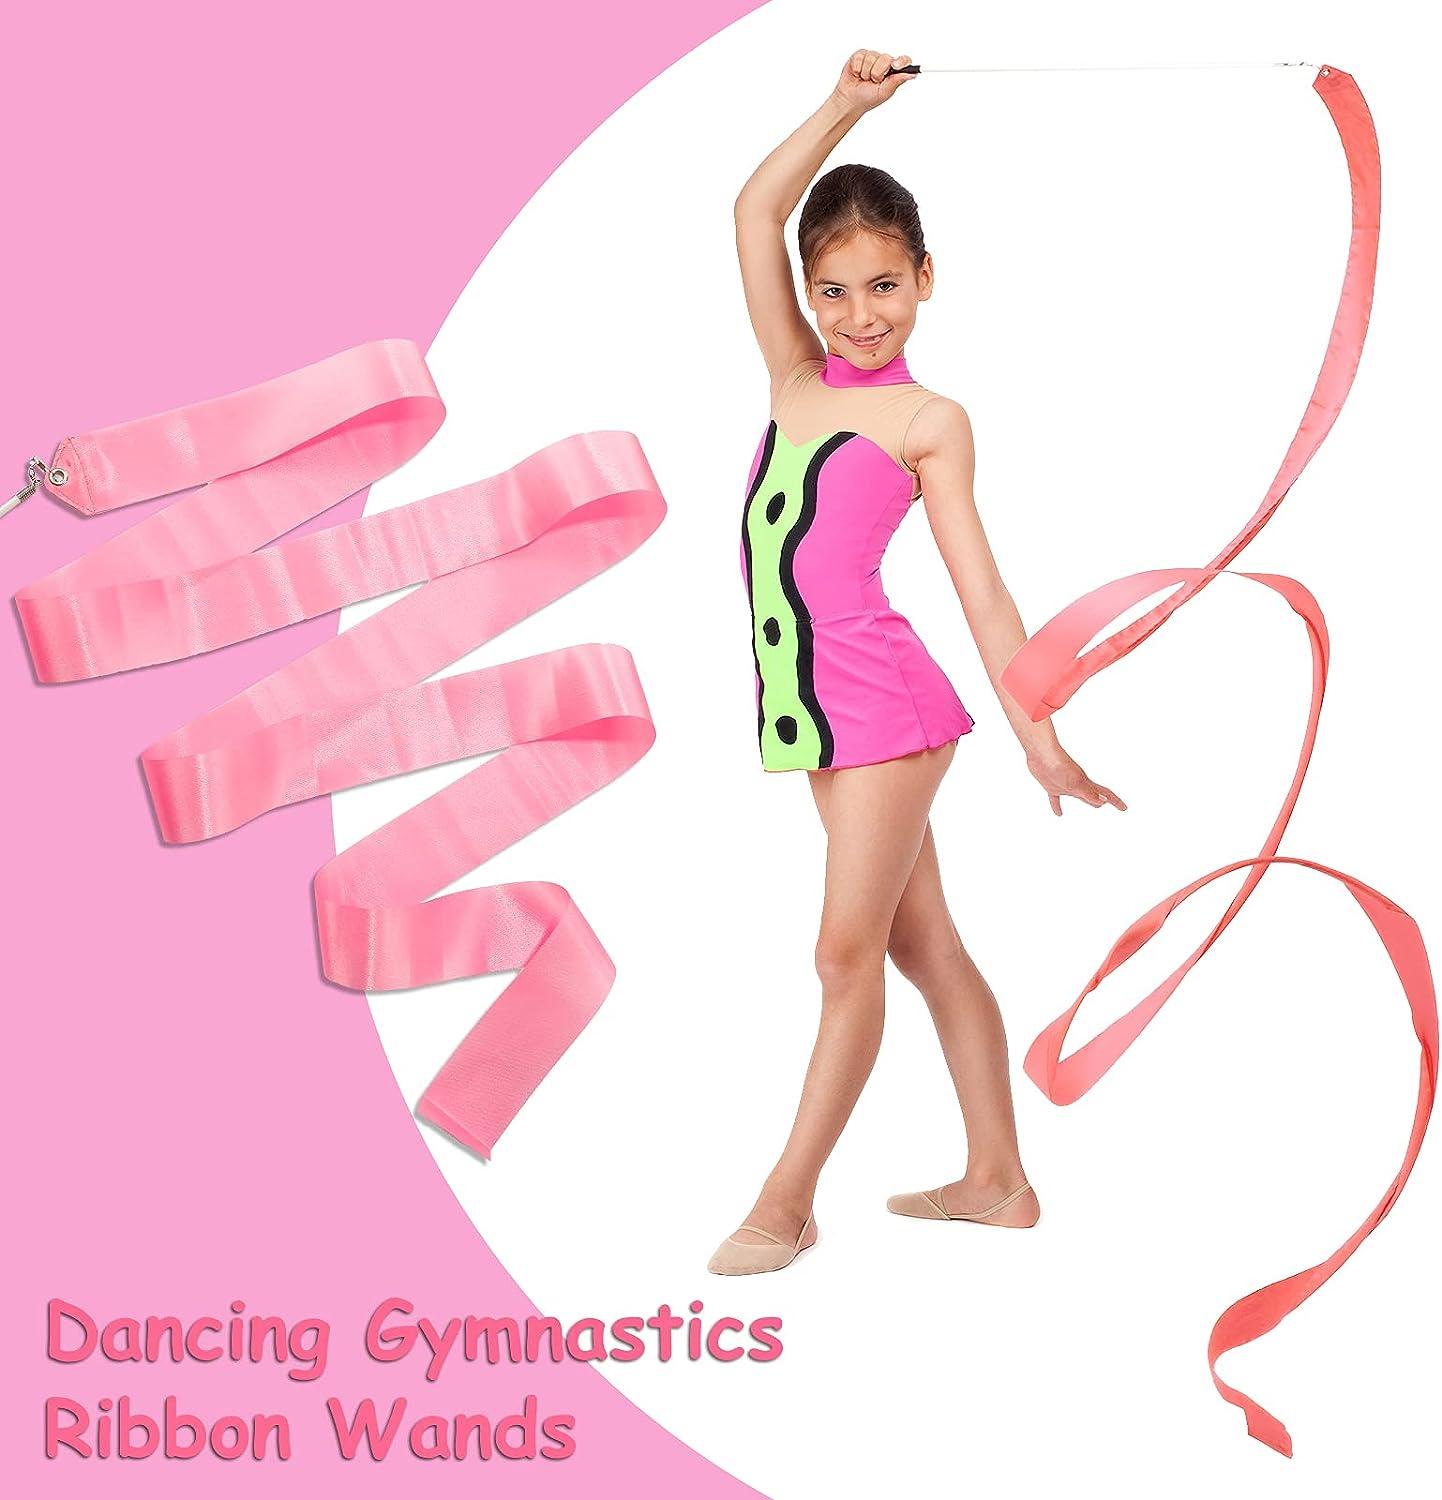 Deekin 30 Pieces Dance Ribbons Streamers Kids' Gymnastics Ribbon Sticks 6.6  Feet Artistic Twirling Ribbons for Gymnastics Party Favors with Non-Slip  Handle (Elegant Style)